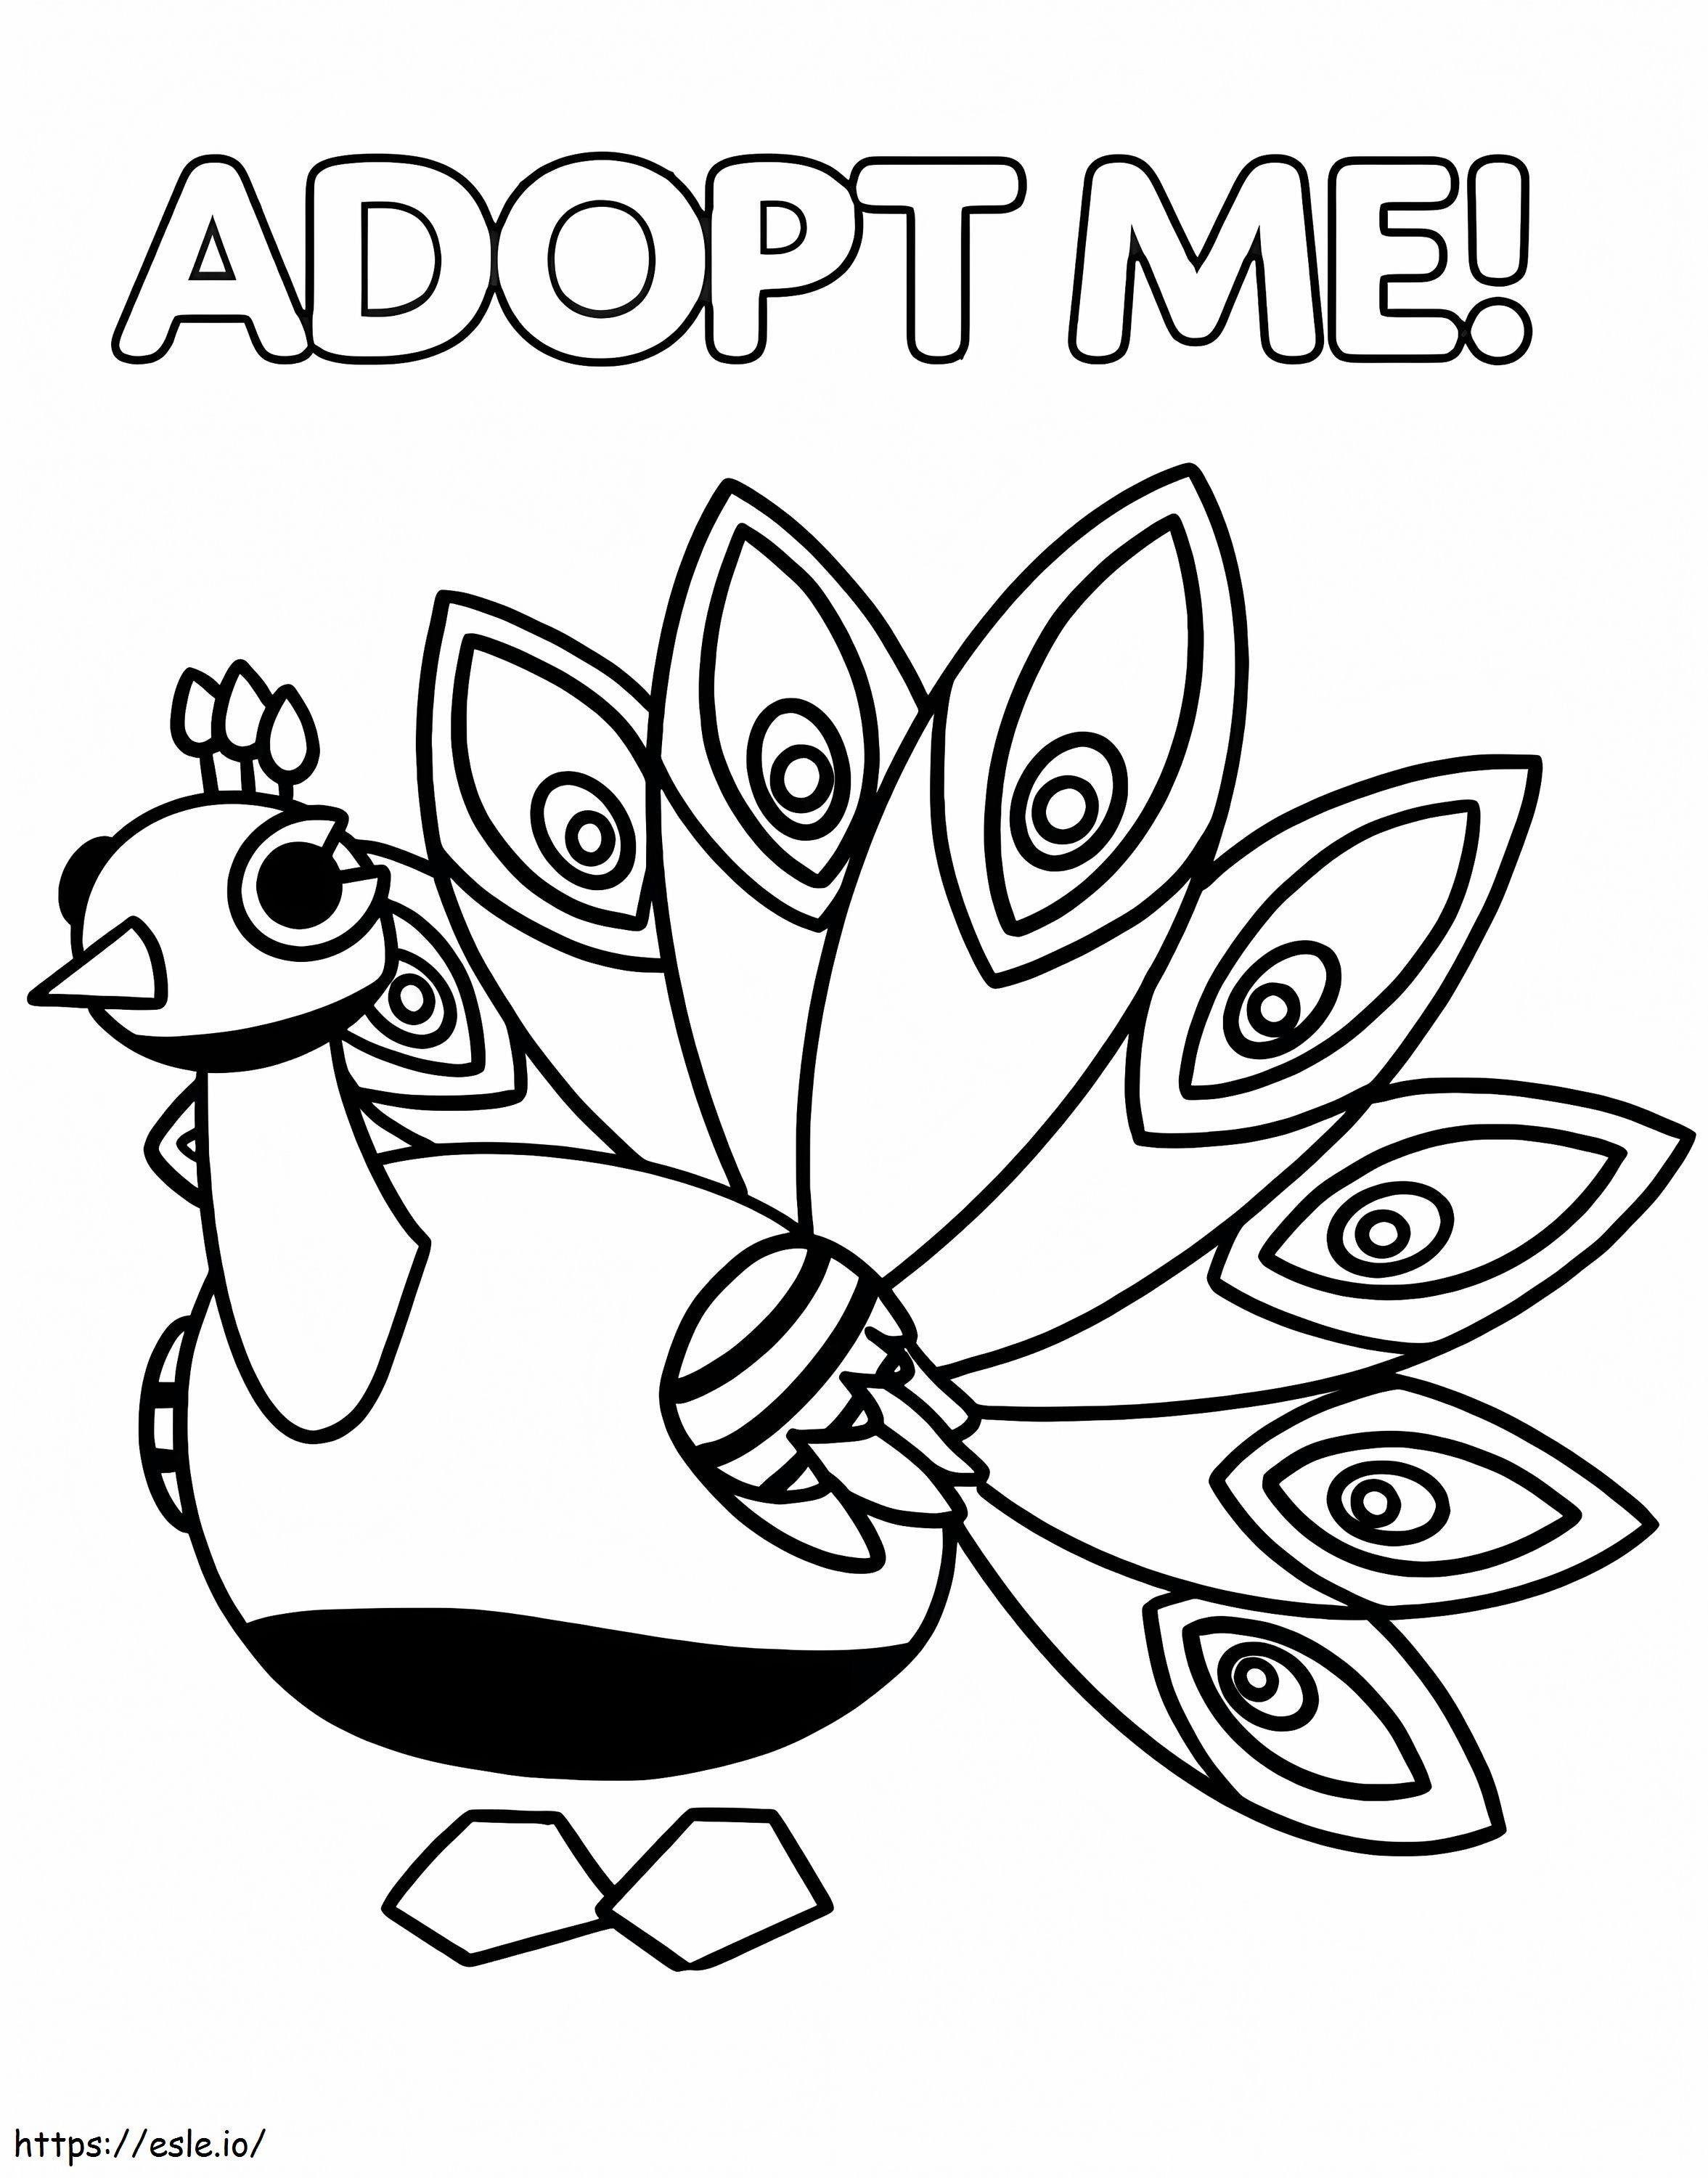 Peacock Adopt Me coloring page